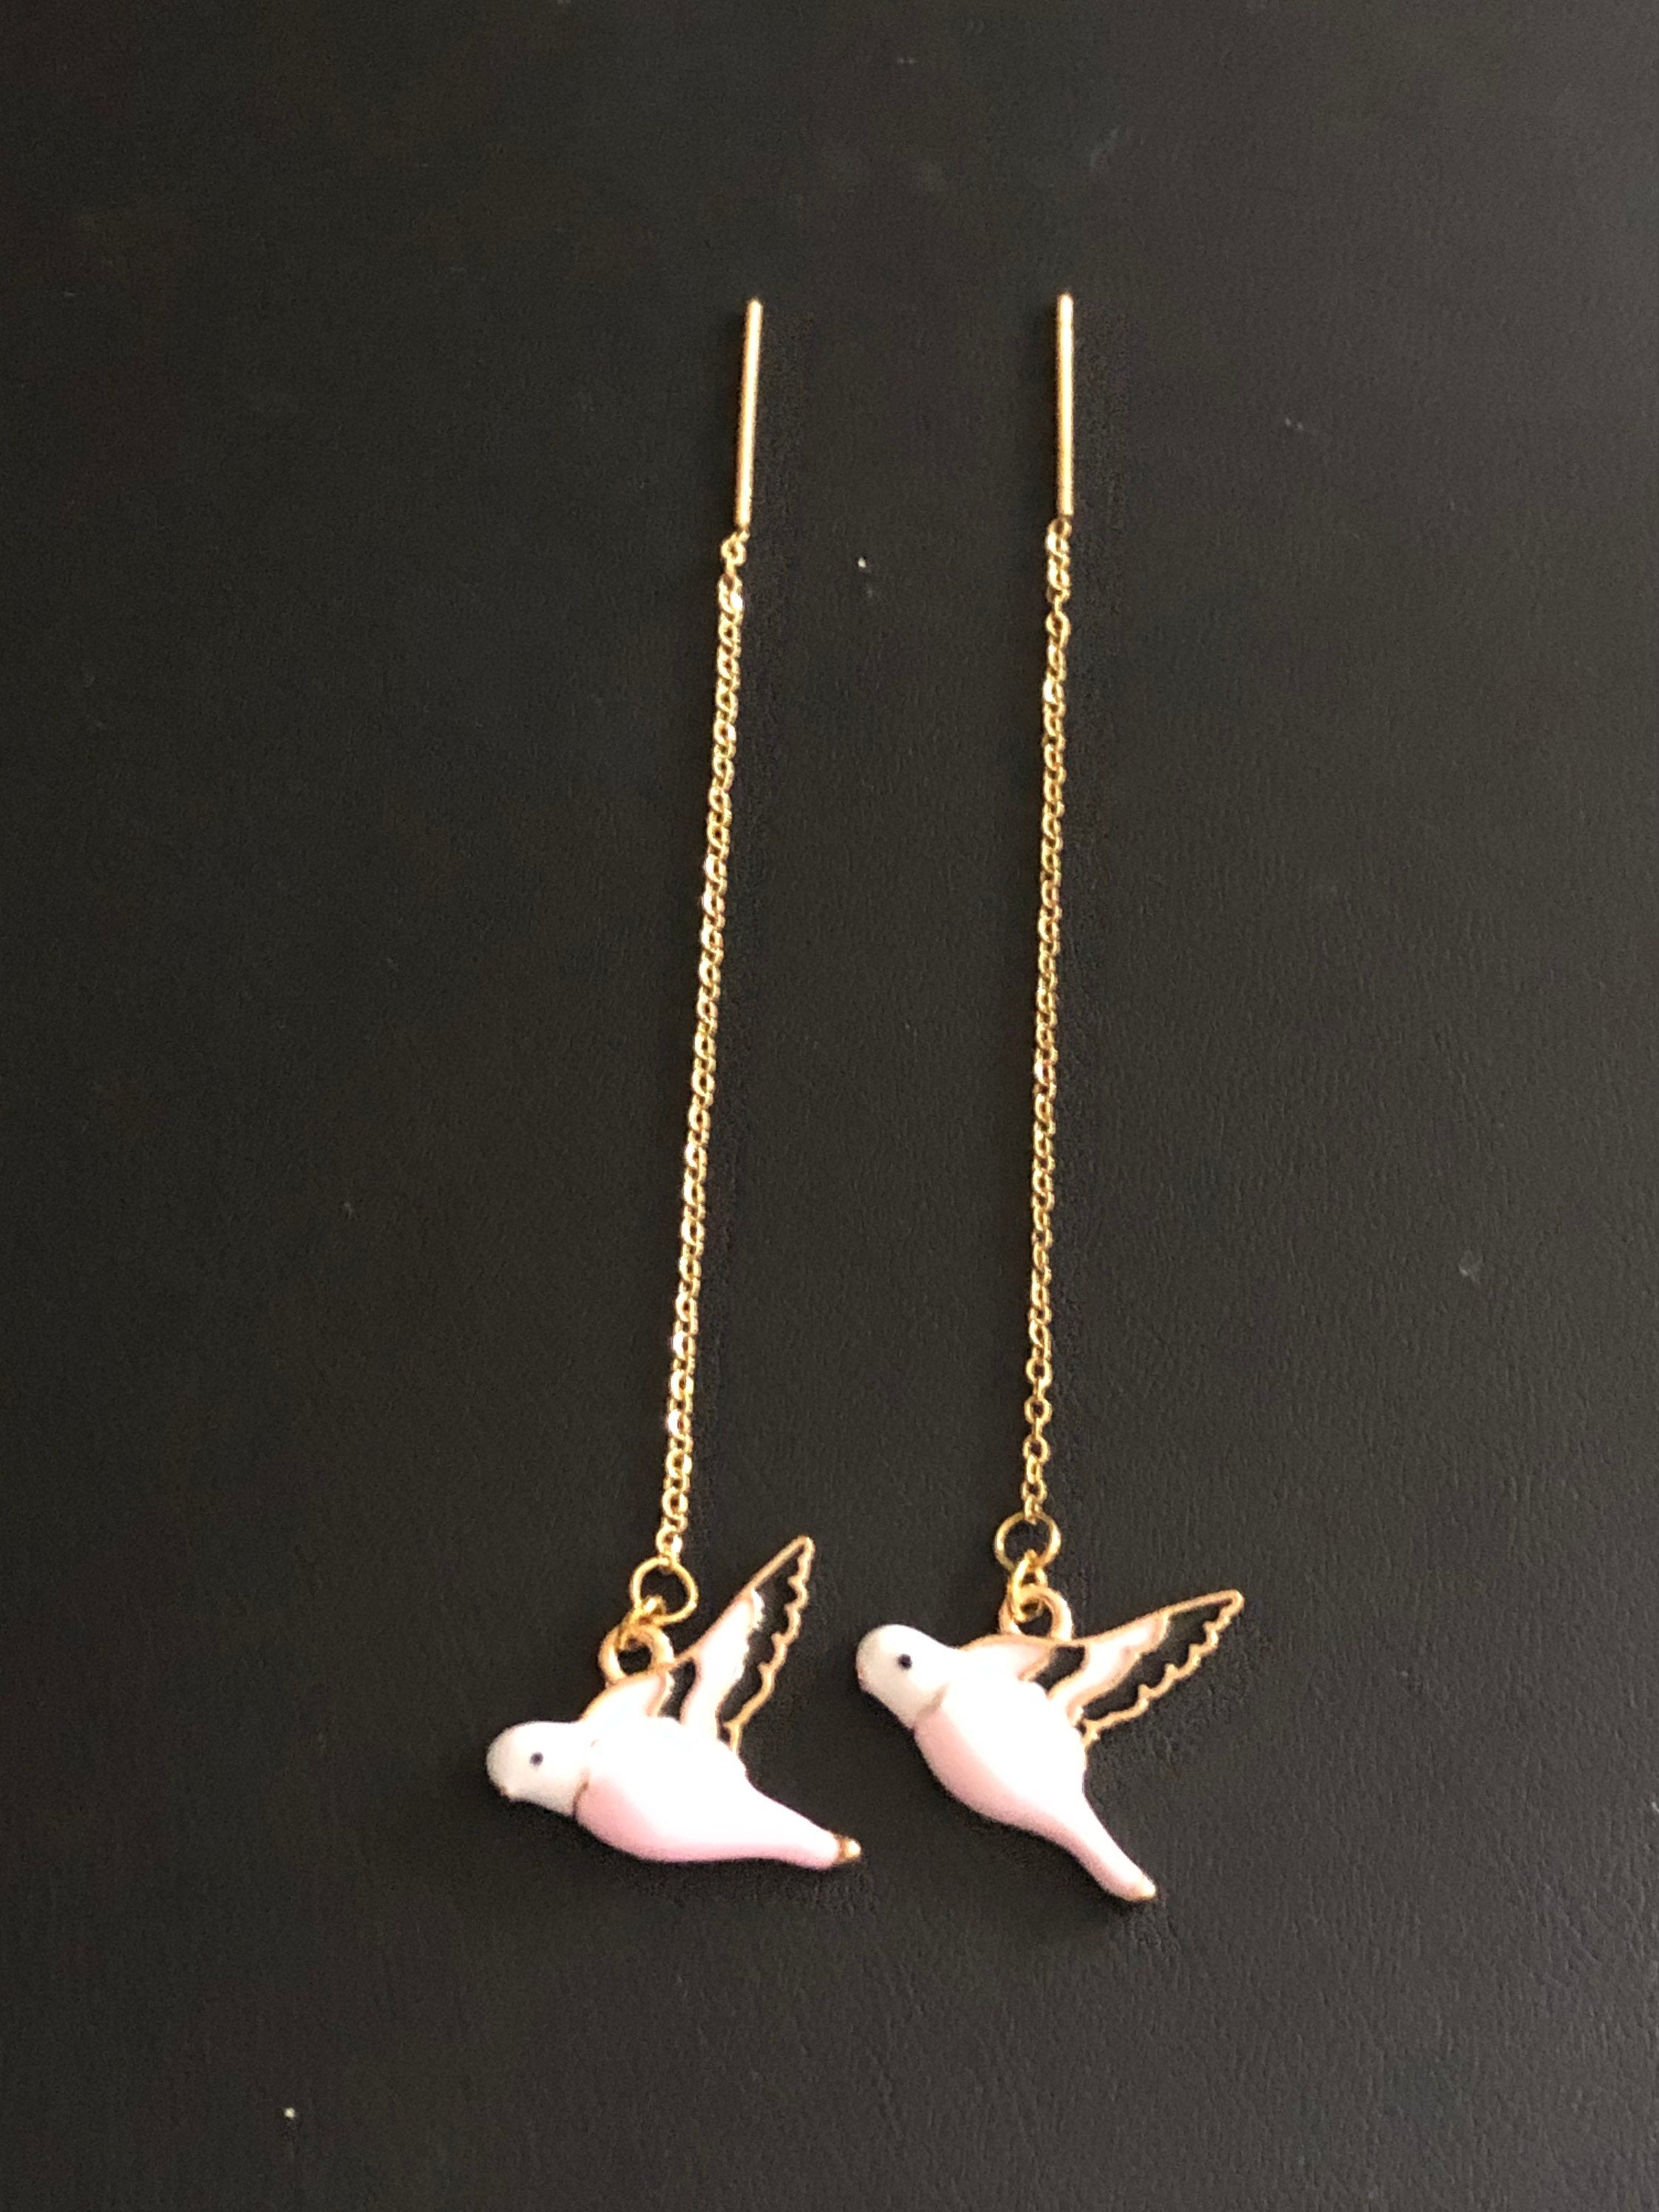 CAOSHI Delicate Little Bird Earrings Female Fashion Jewelry with Dazzling  Zirconia Silver Color Accessories for Everday Wear